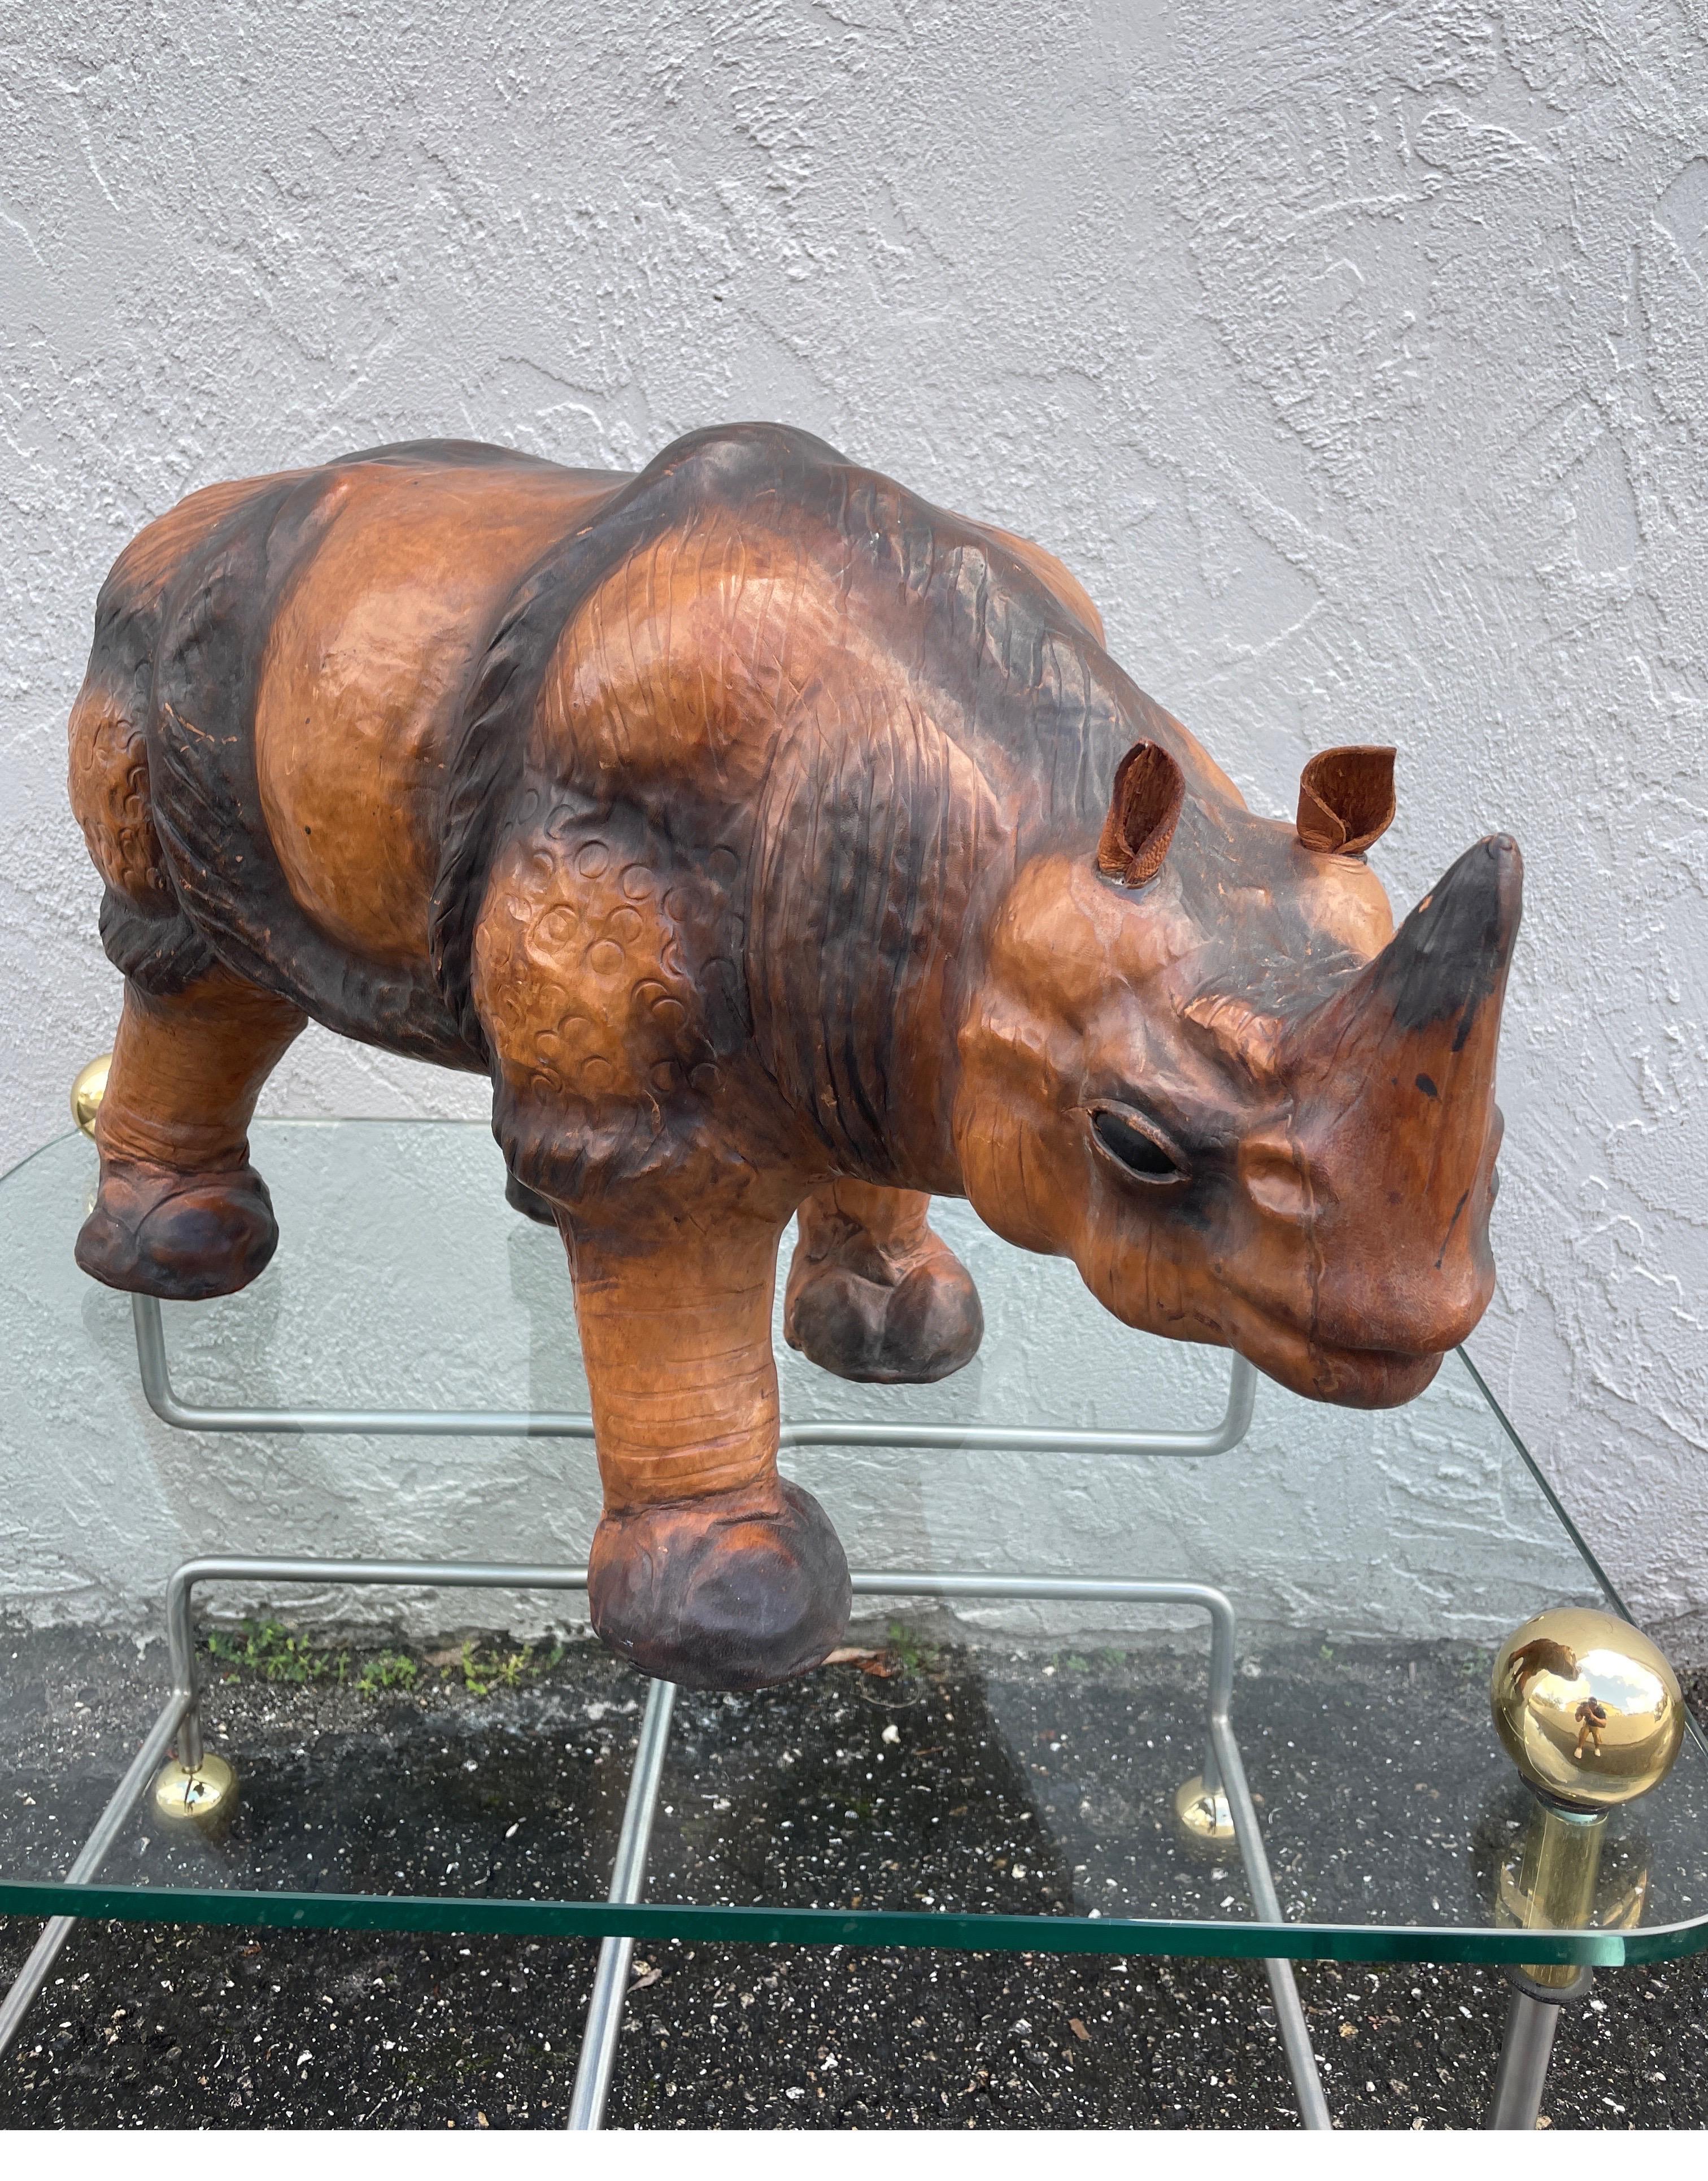 Leather Rhinoceros footrest that will add a whimsical touch to any room. Very well made & quite sturdy.